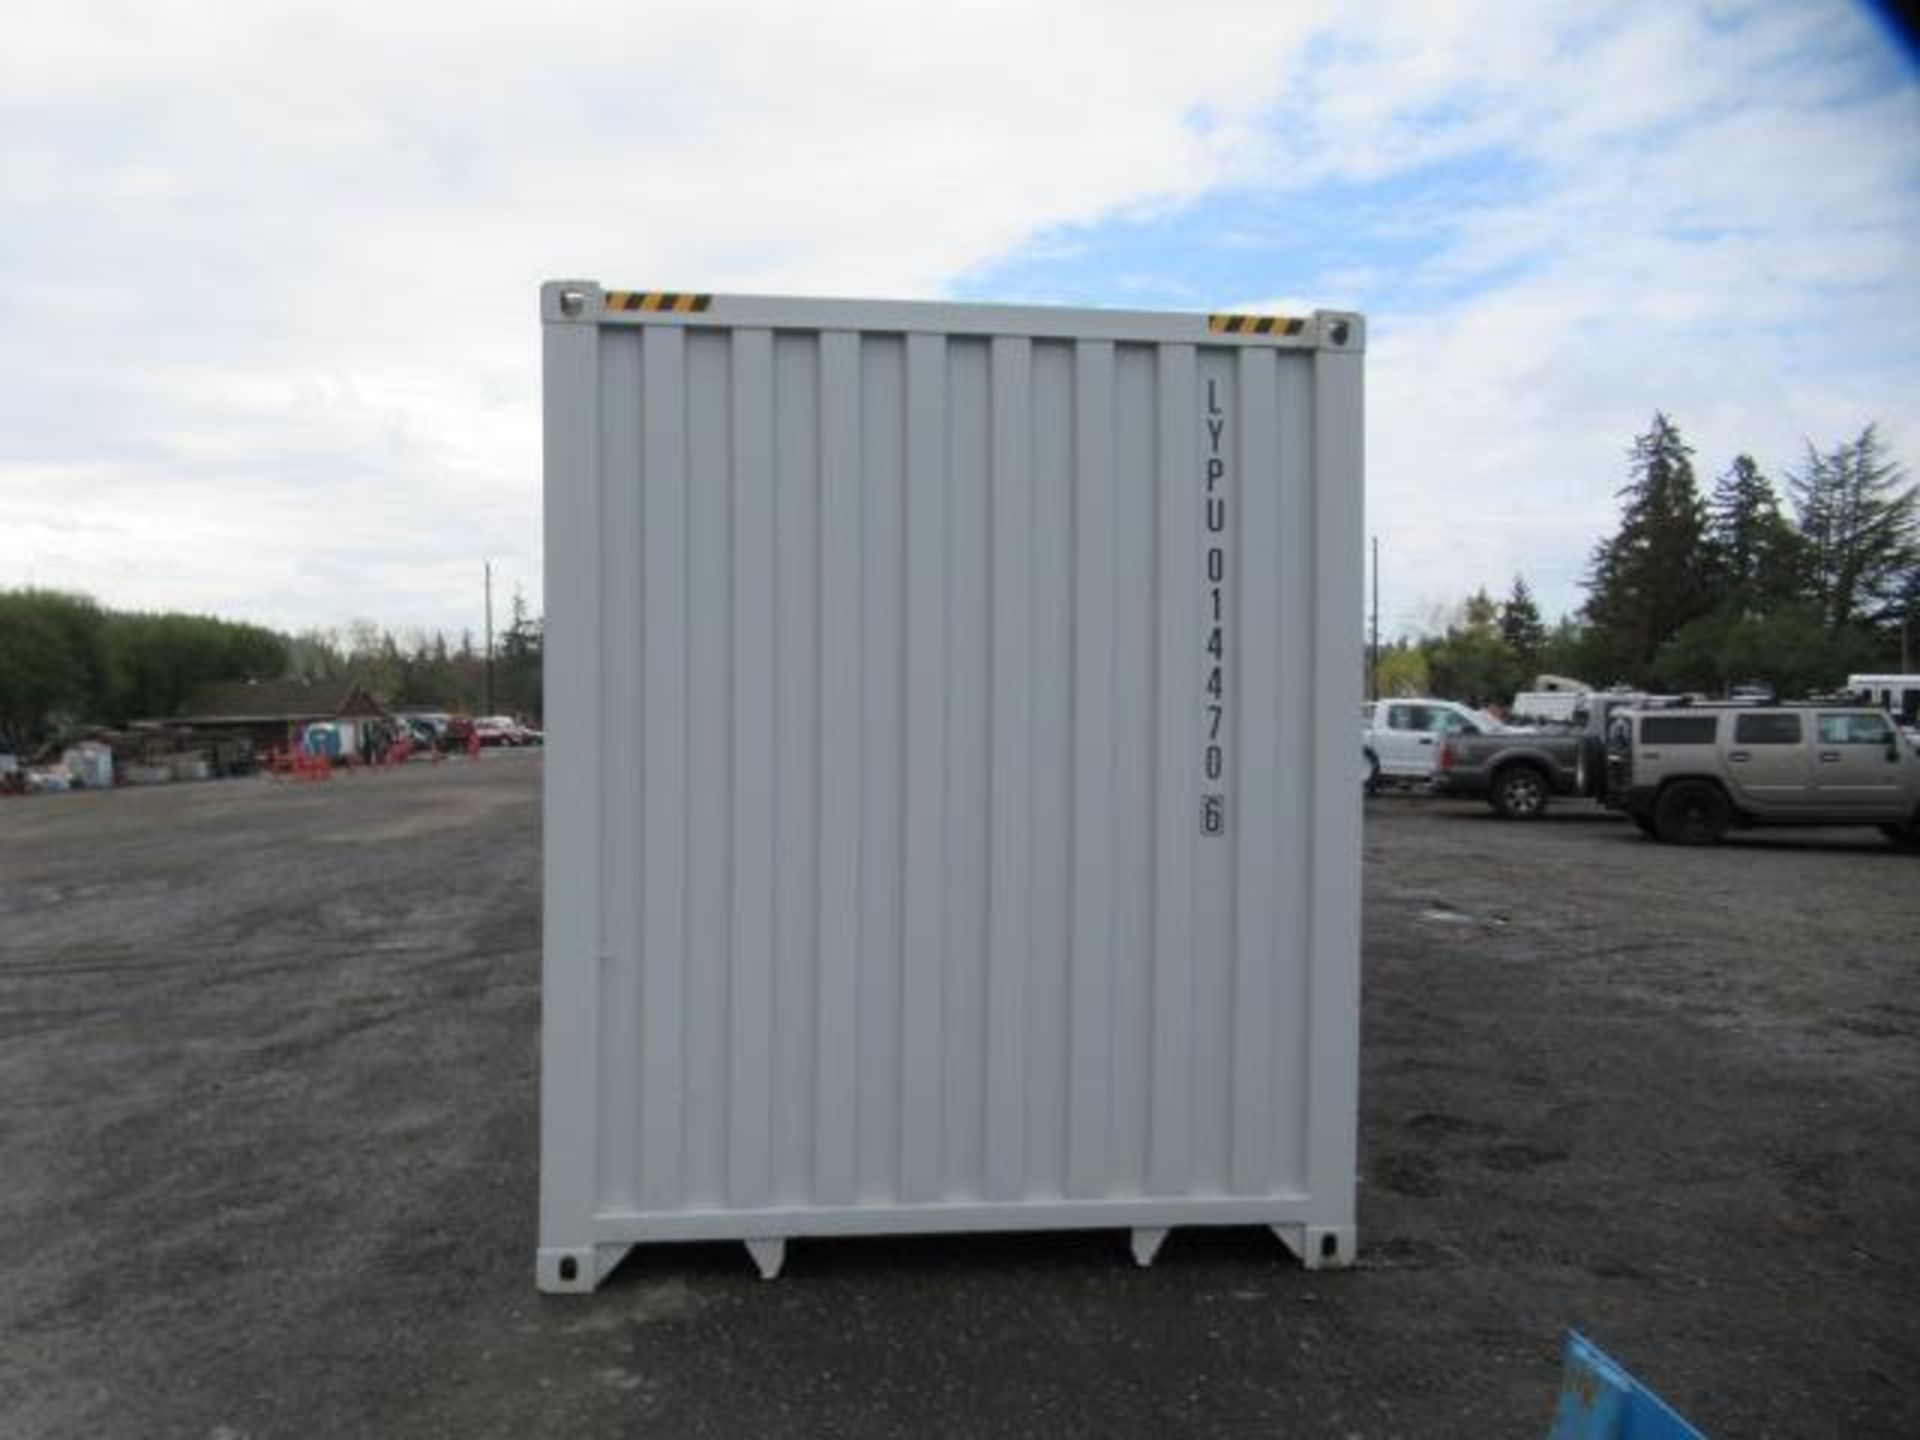 2024 40' HIGH CUBE SHIPPING CONTAINER W/ (2) SIDE DOORS, SER#: LYPU0144706 (UNUSED) - Image 2 of 6